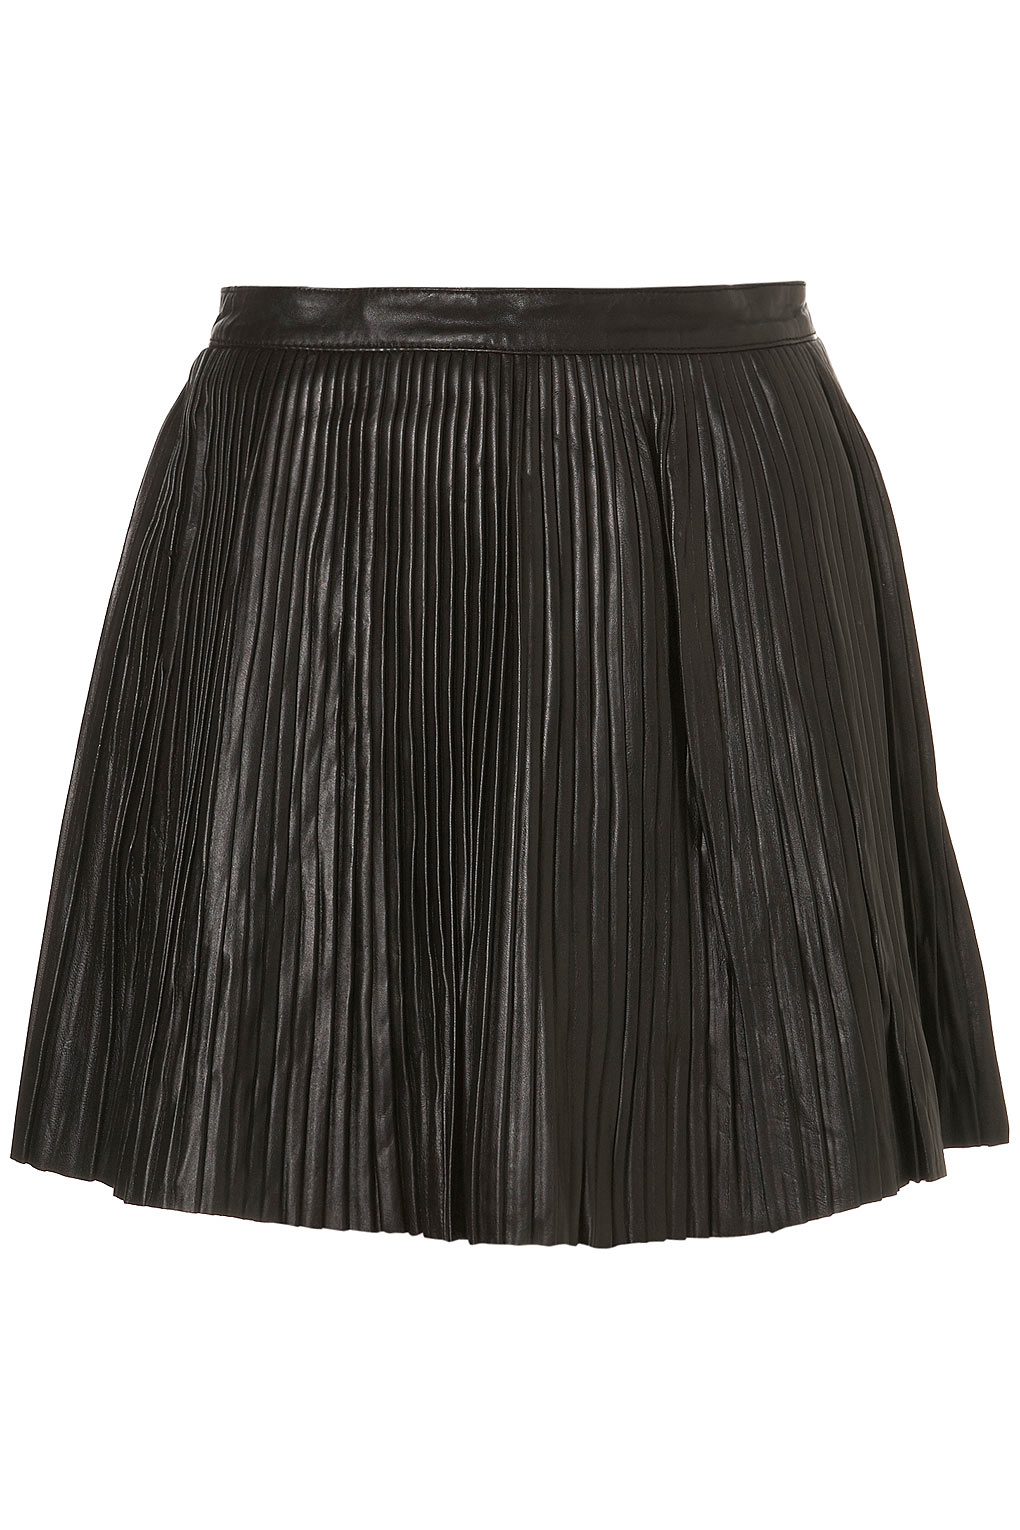 TOPSHOP Premium Leather Pleated Skirt in Black - Lyst